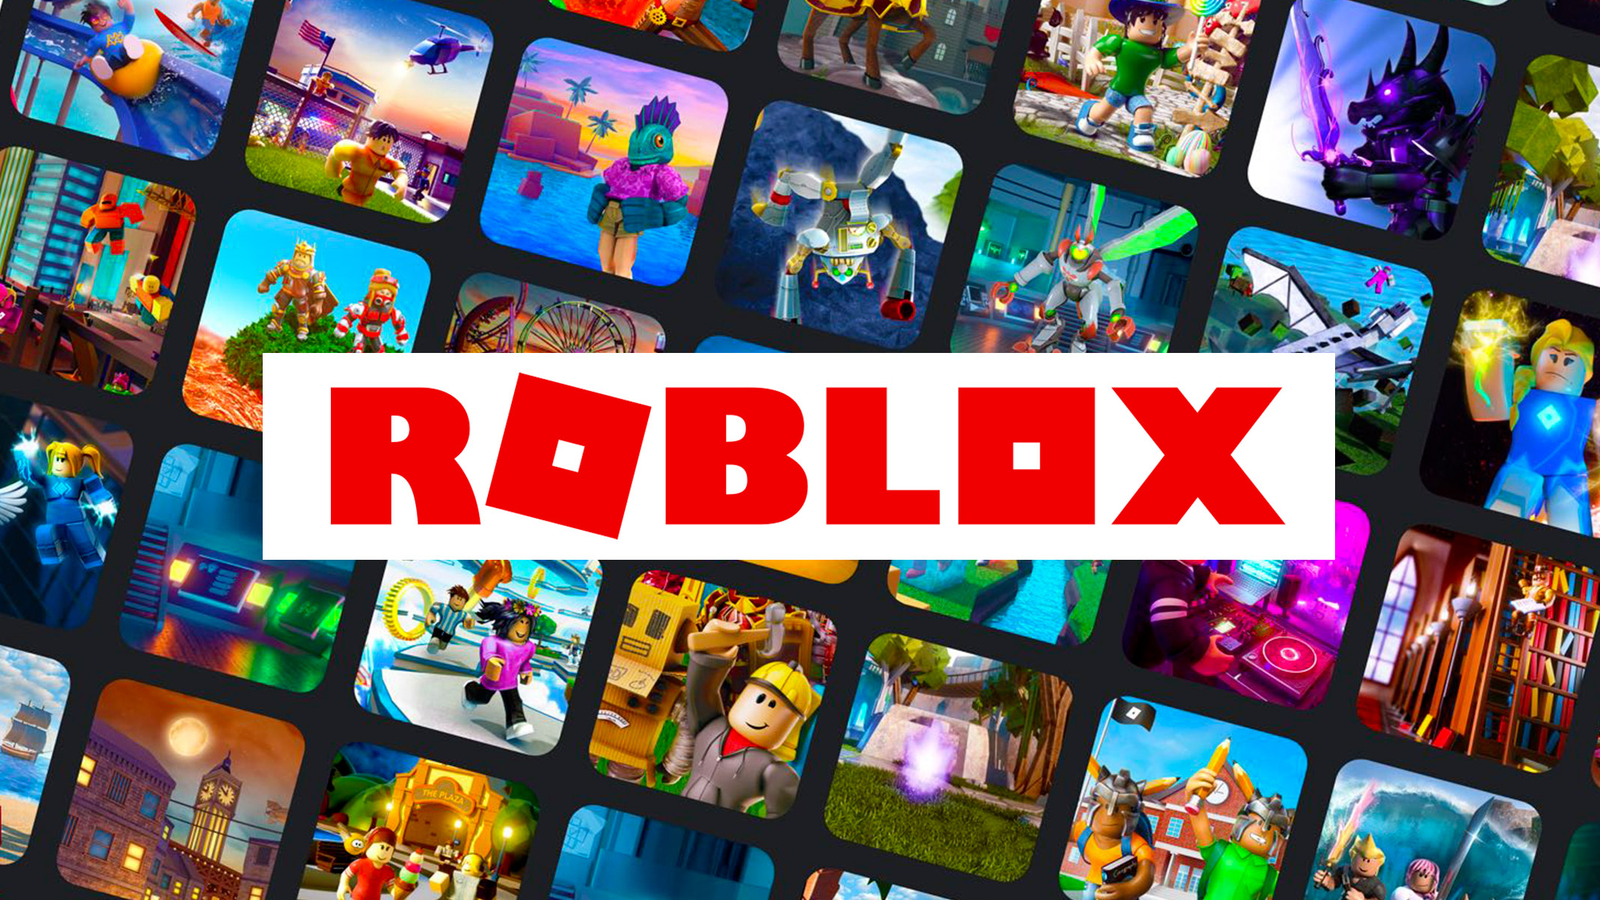 Roblox teen gamers engage in sexual behavior in platform's 'red light  district', report finds